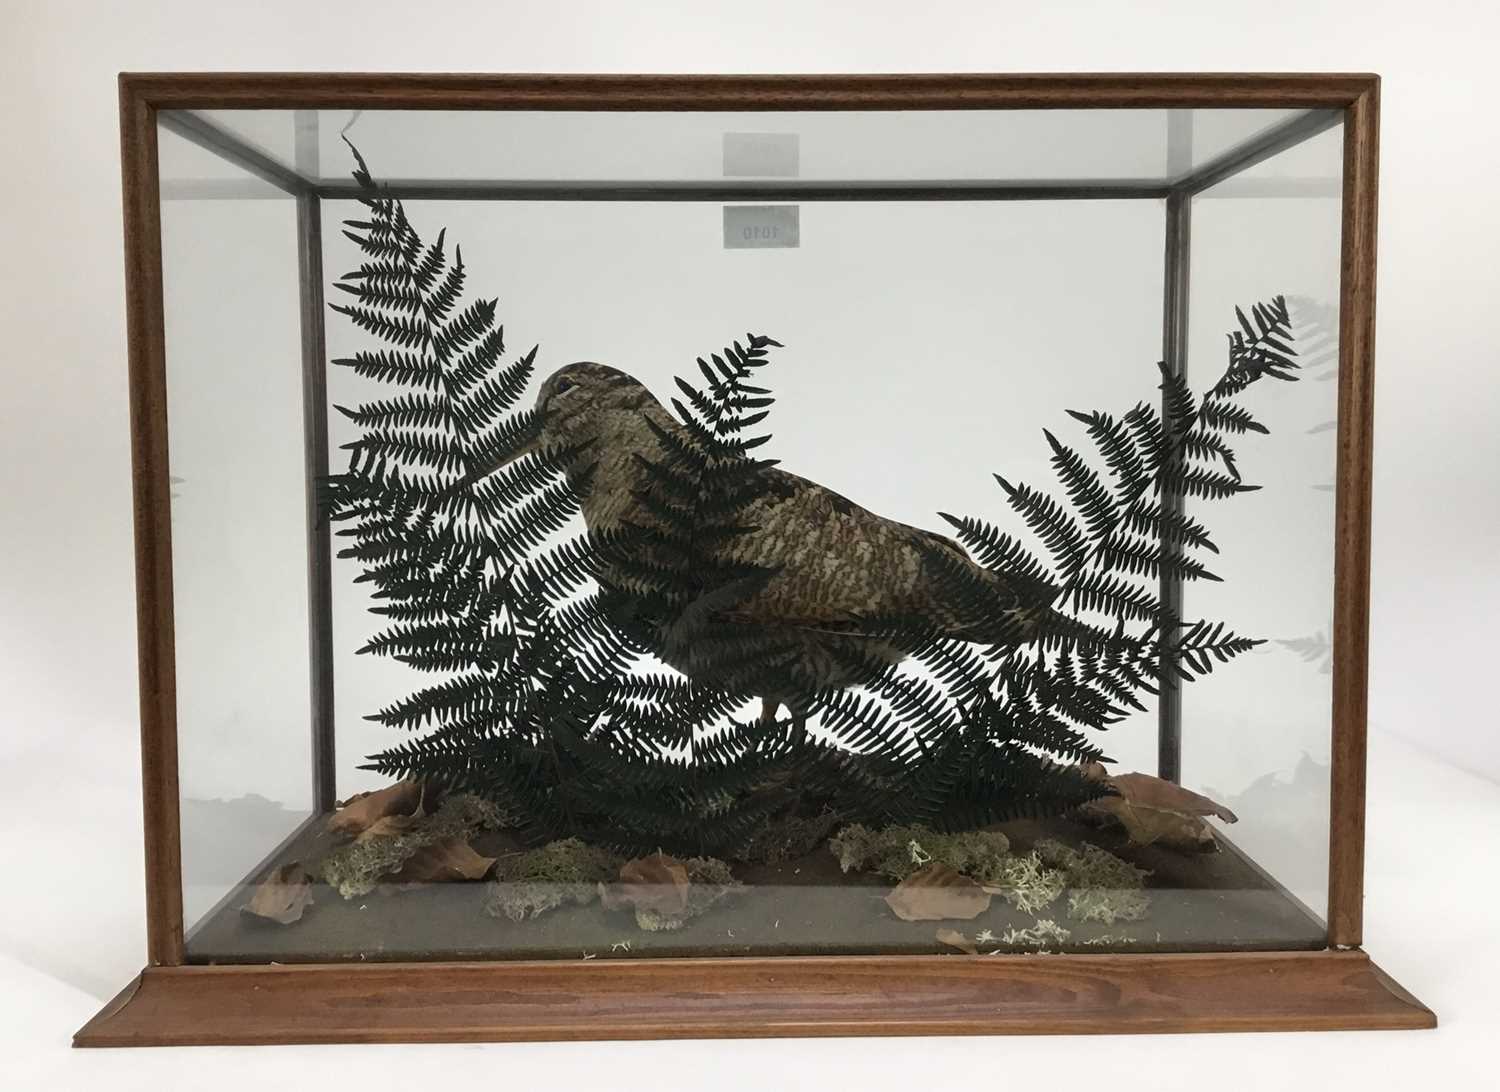 Woodcock within naturalistic setting in glazed case - Image 4 of 4